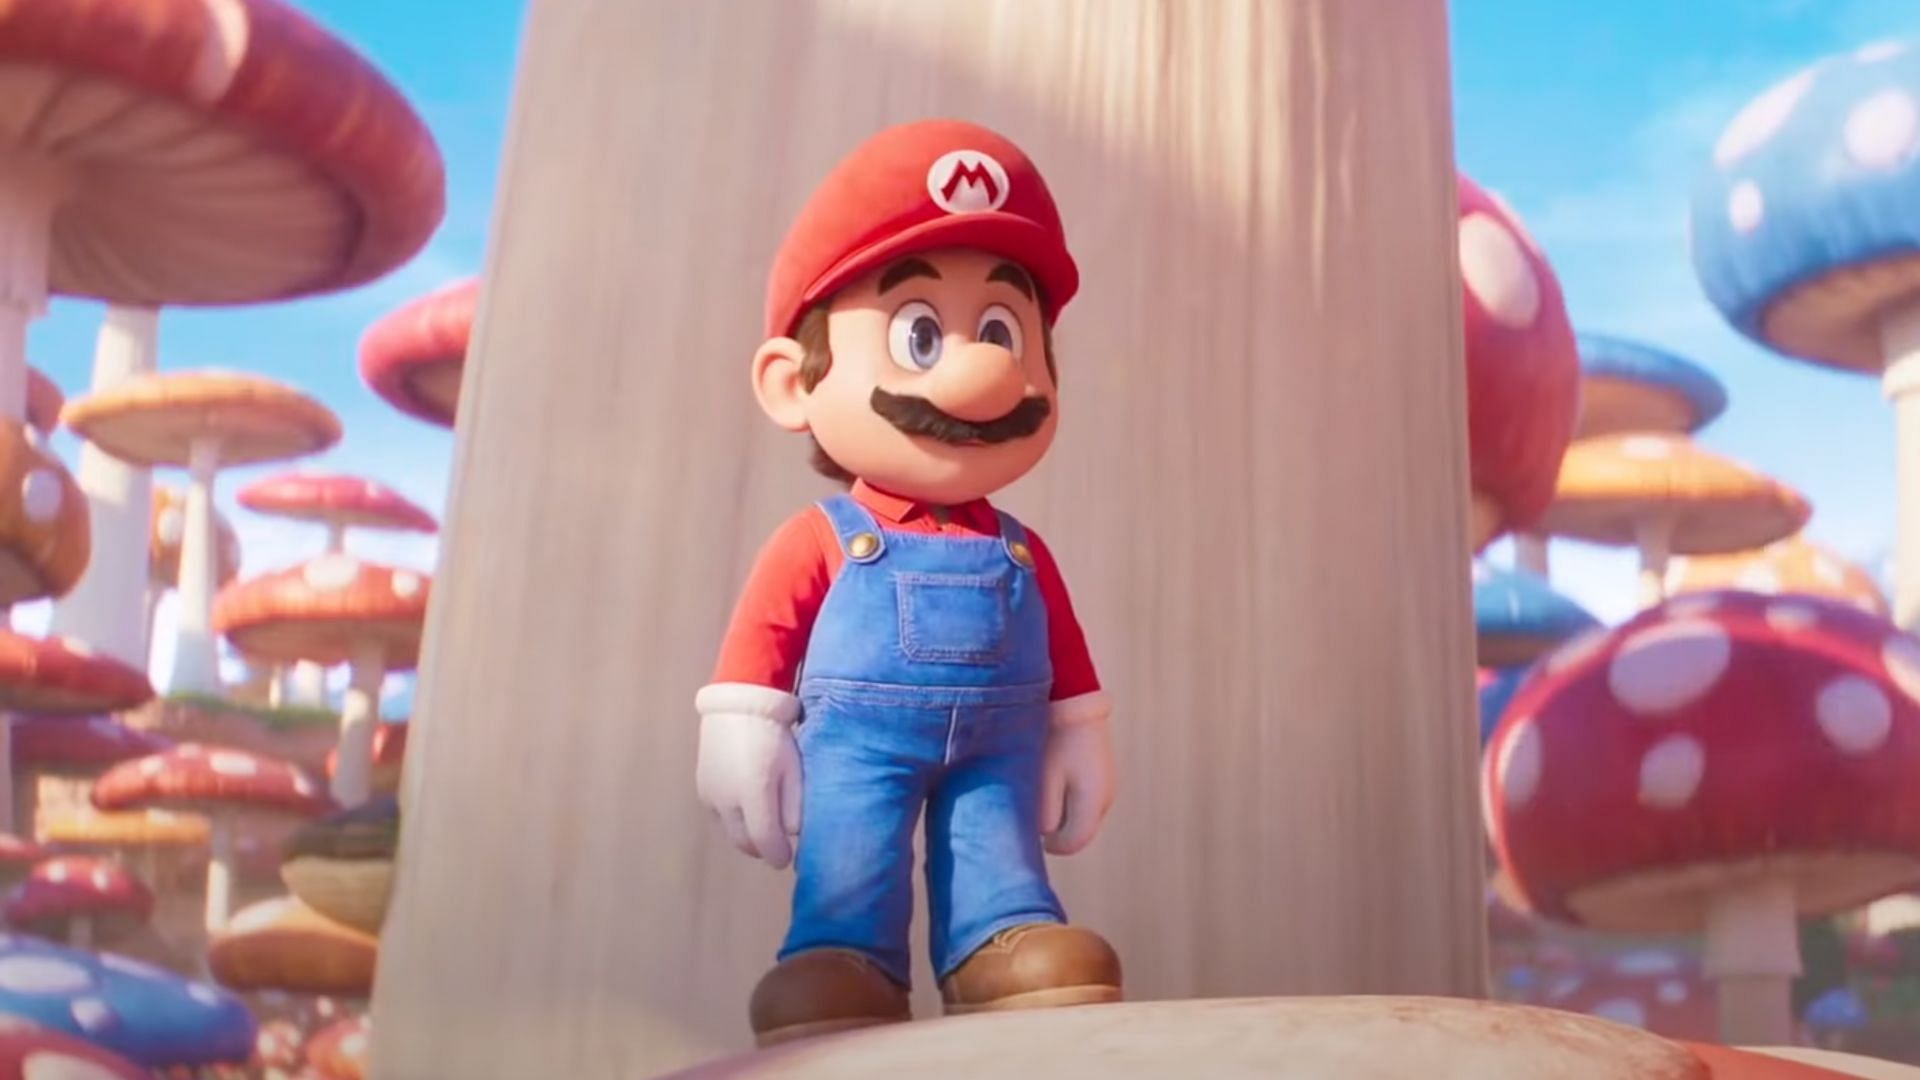 Charlie Day Wants A Super Mario Movie Spinoff For Luigi's Mansion